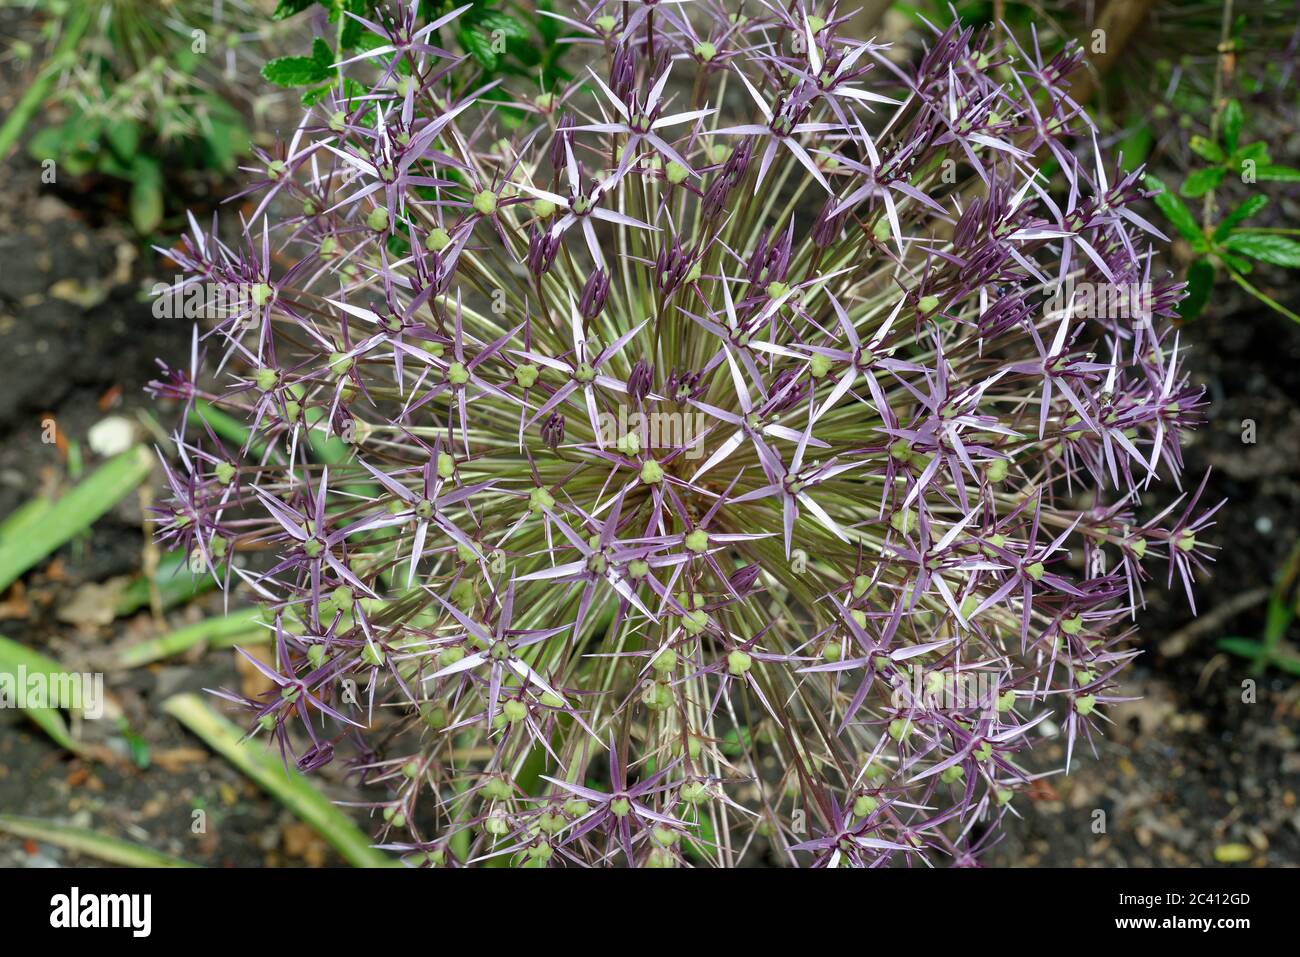 A purple allium flower head in late spring/early summer. Also known as cultivated onion/garlic, it produces a large ornamental flowerhead. Stock Photo